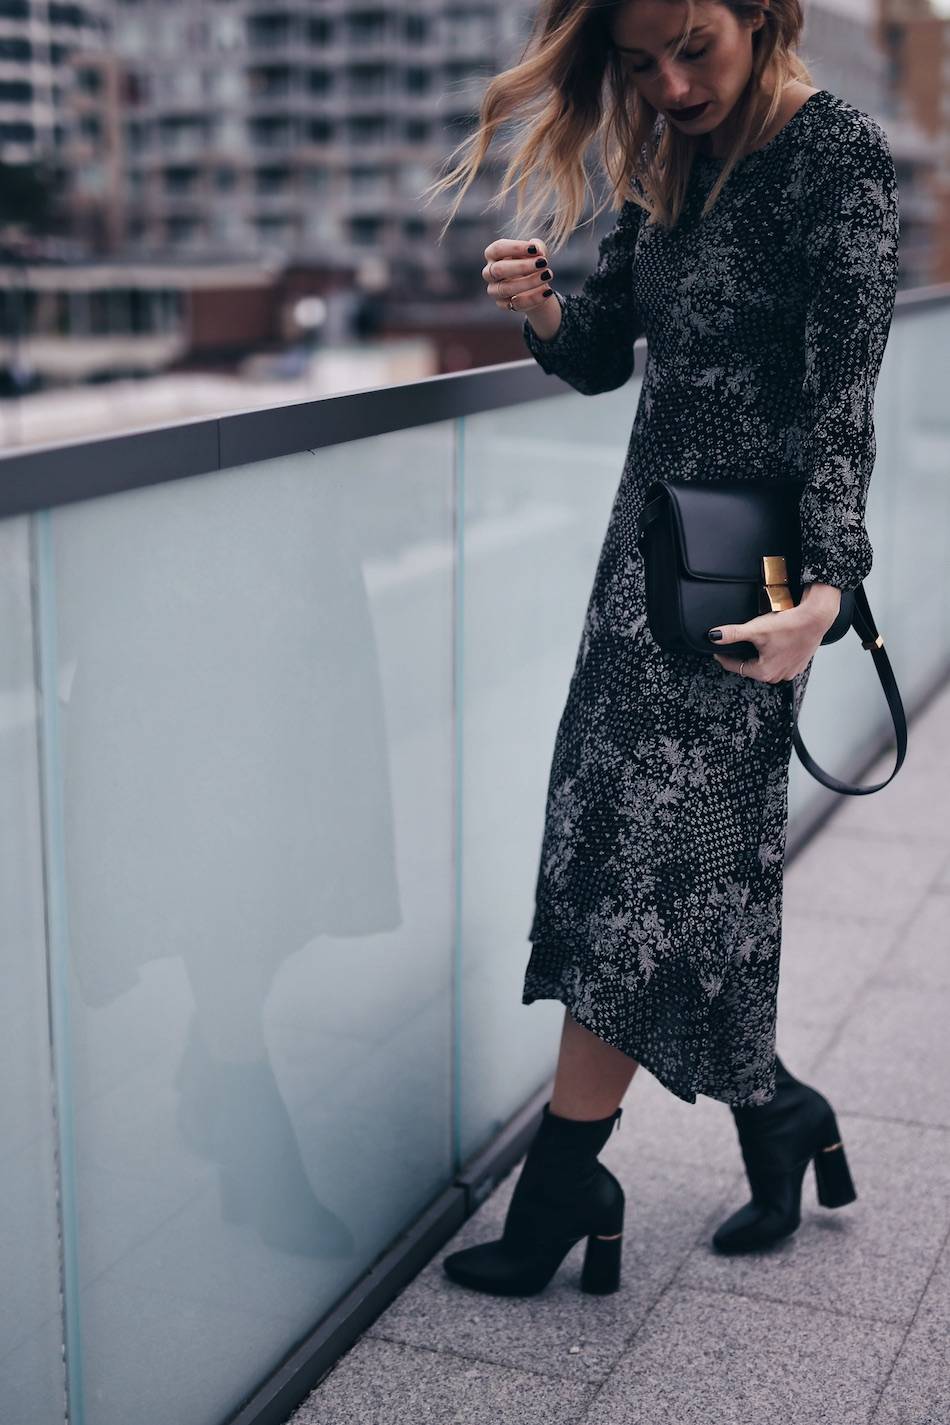 style-blogger-jill-lansky-of-the-august-diaries-showing-easy-holiday-outfits-in-old-navy-print-dress-celine-box-bag-and-3-1-phillip-lim-kyoto-boots-2